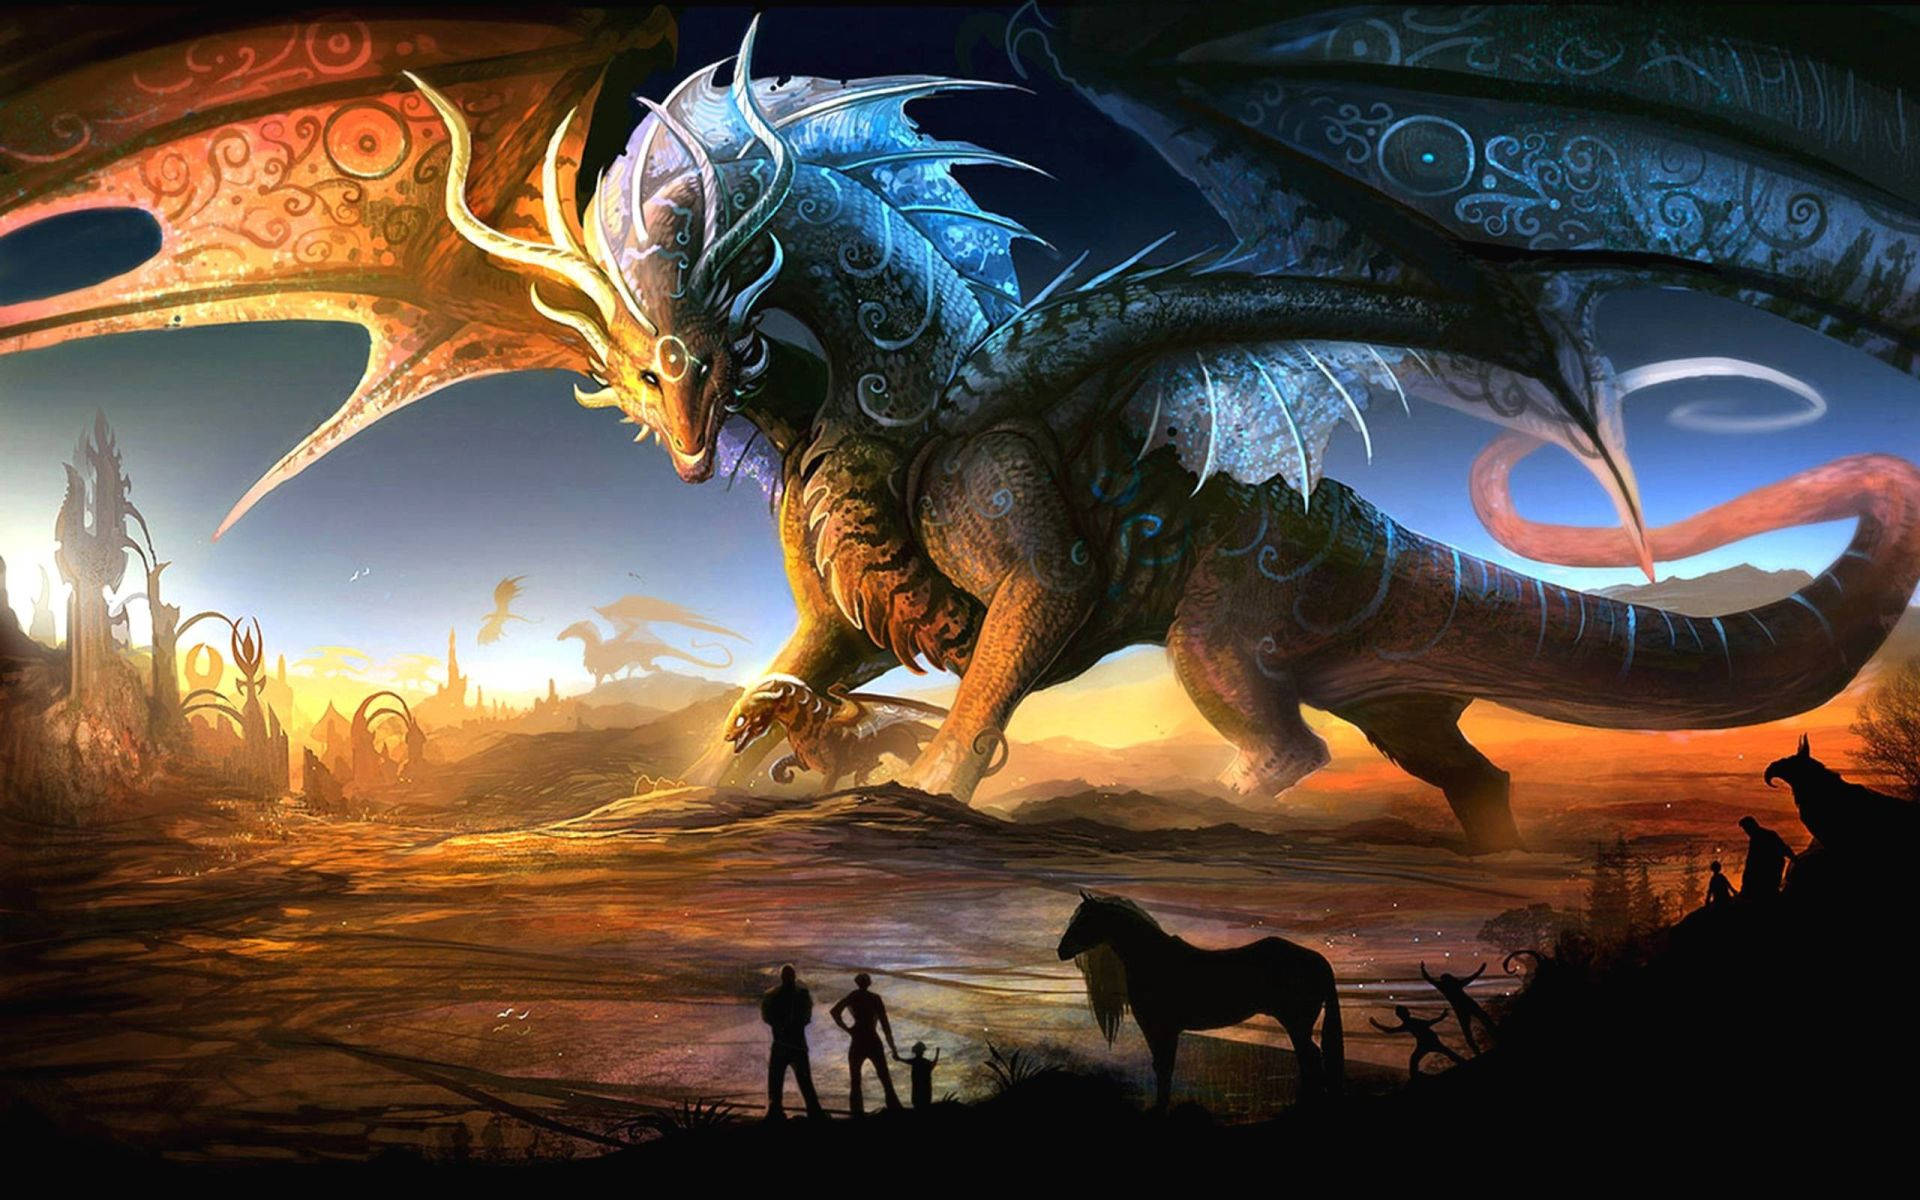 Take Flight with the Coolest Dragon Wallpaper